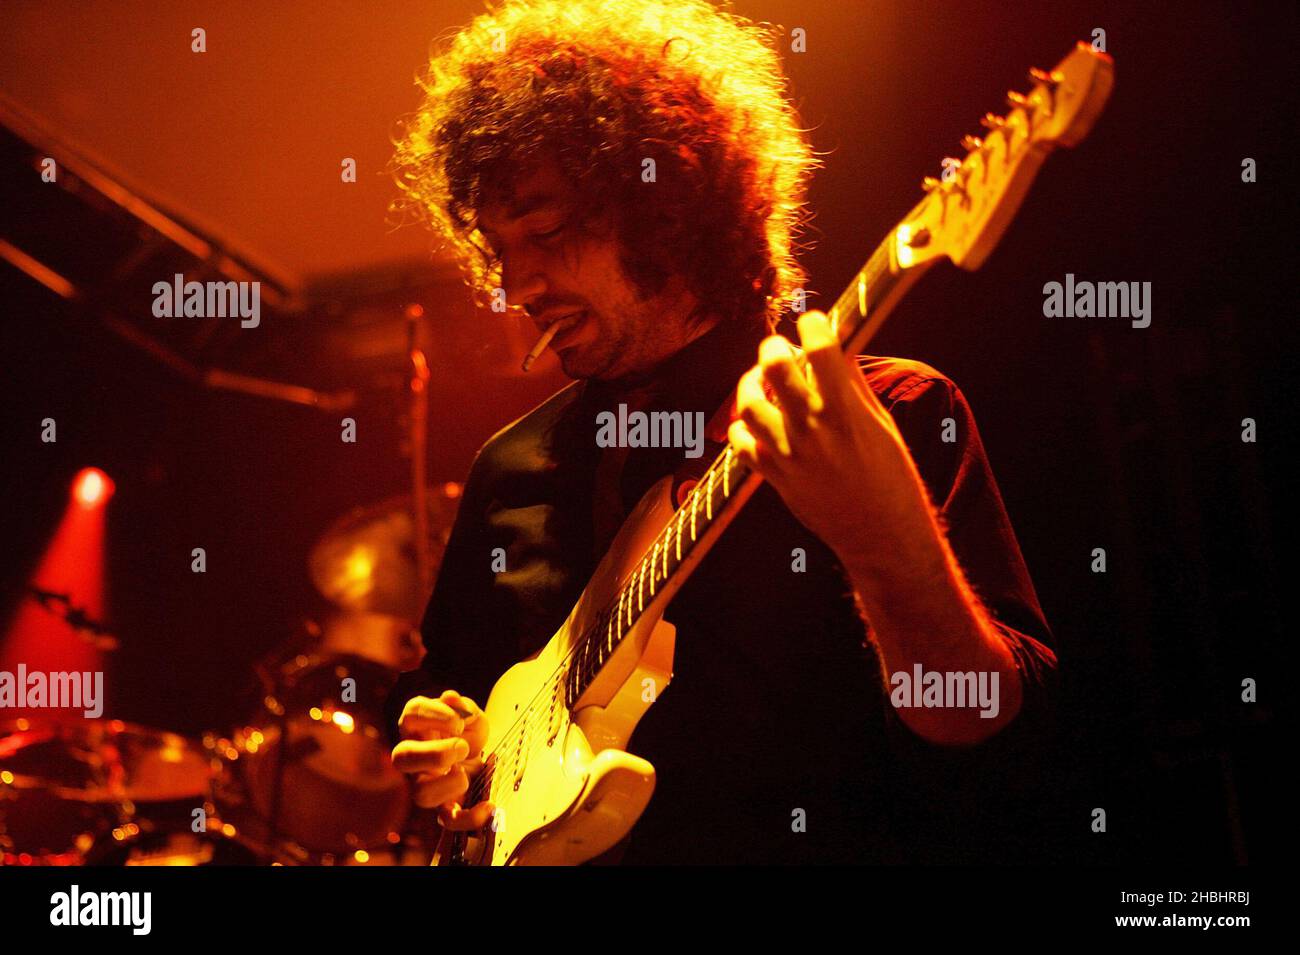 Albert Hammond Junior of New York indie group The Strokes play their first London date of the UK tour promoting their third album 'First Impressions Of Earth', released January 9, at Shepherds Bush Empire in London. Stock Photo